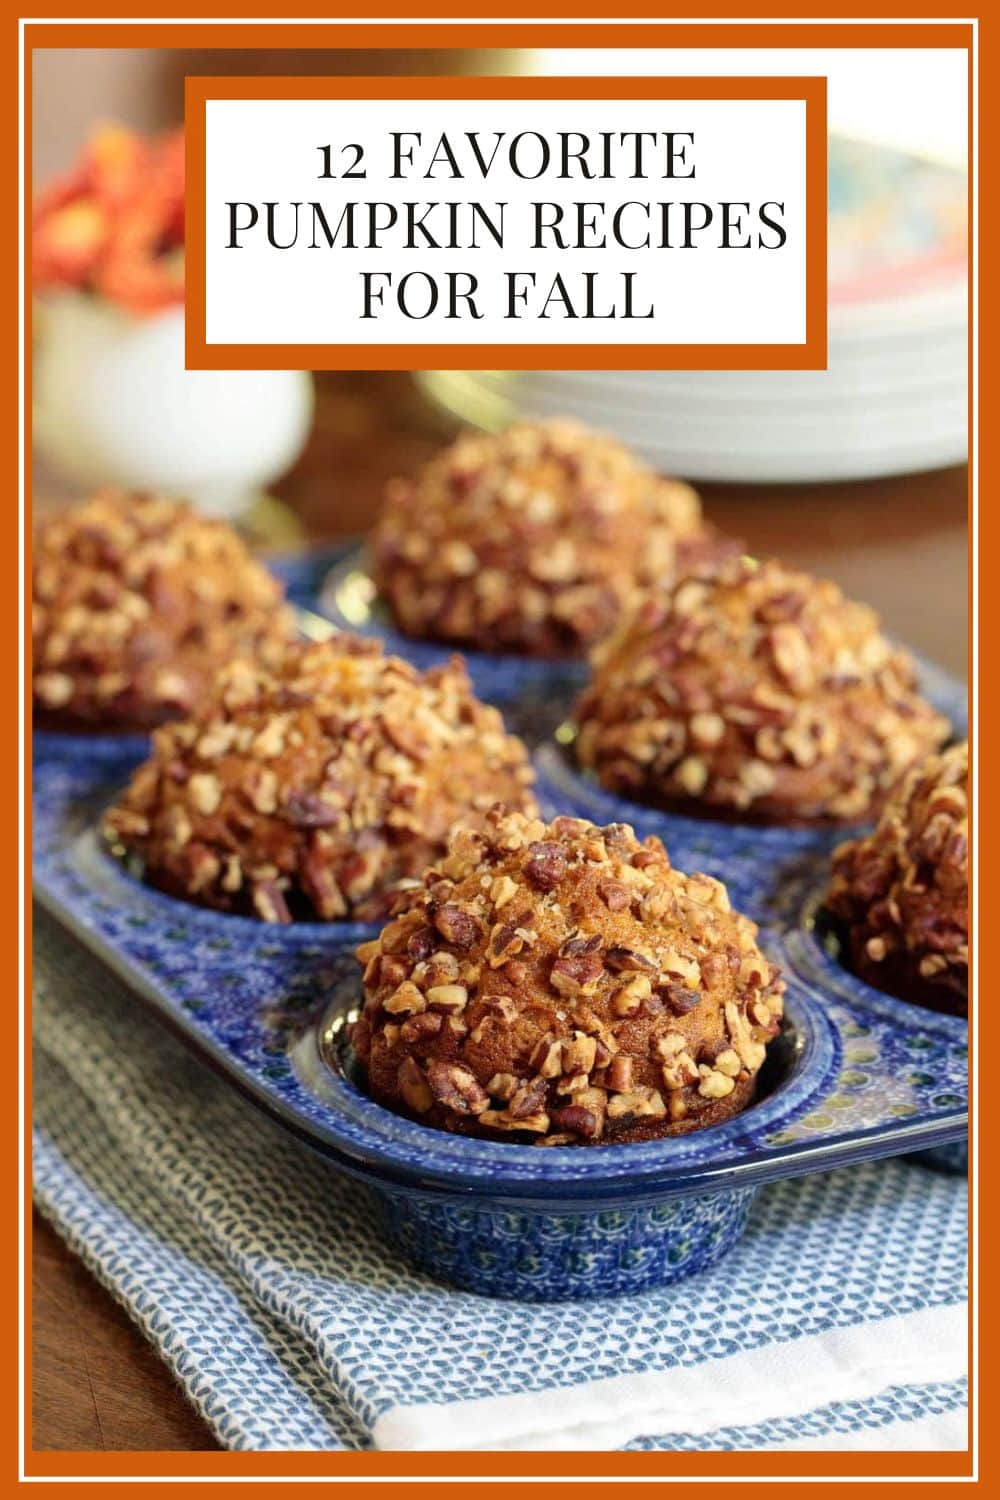 Calling All Pumpkin Lovers! (Sweet and Savory Recipes for your Fall enjoyment)